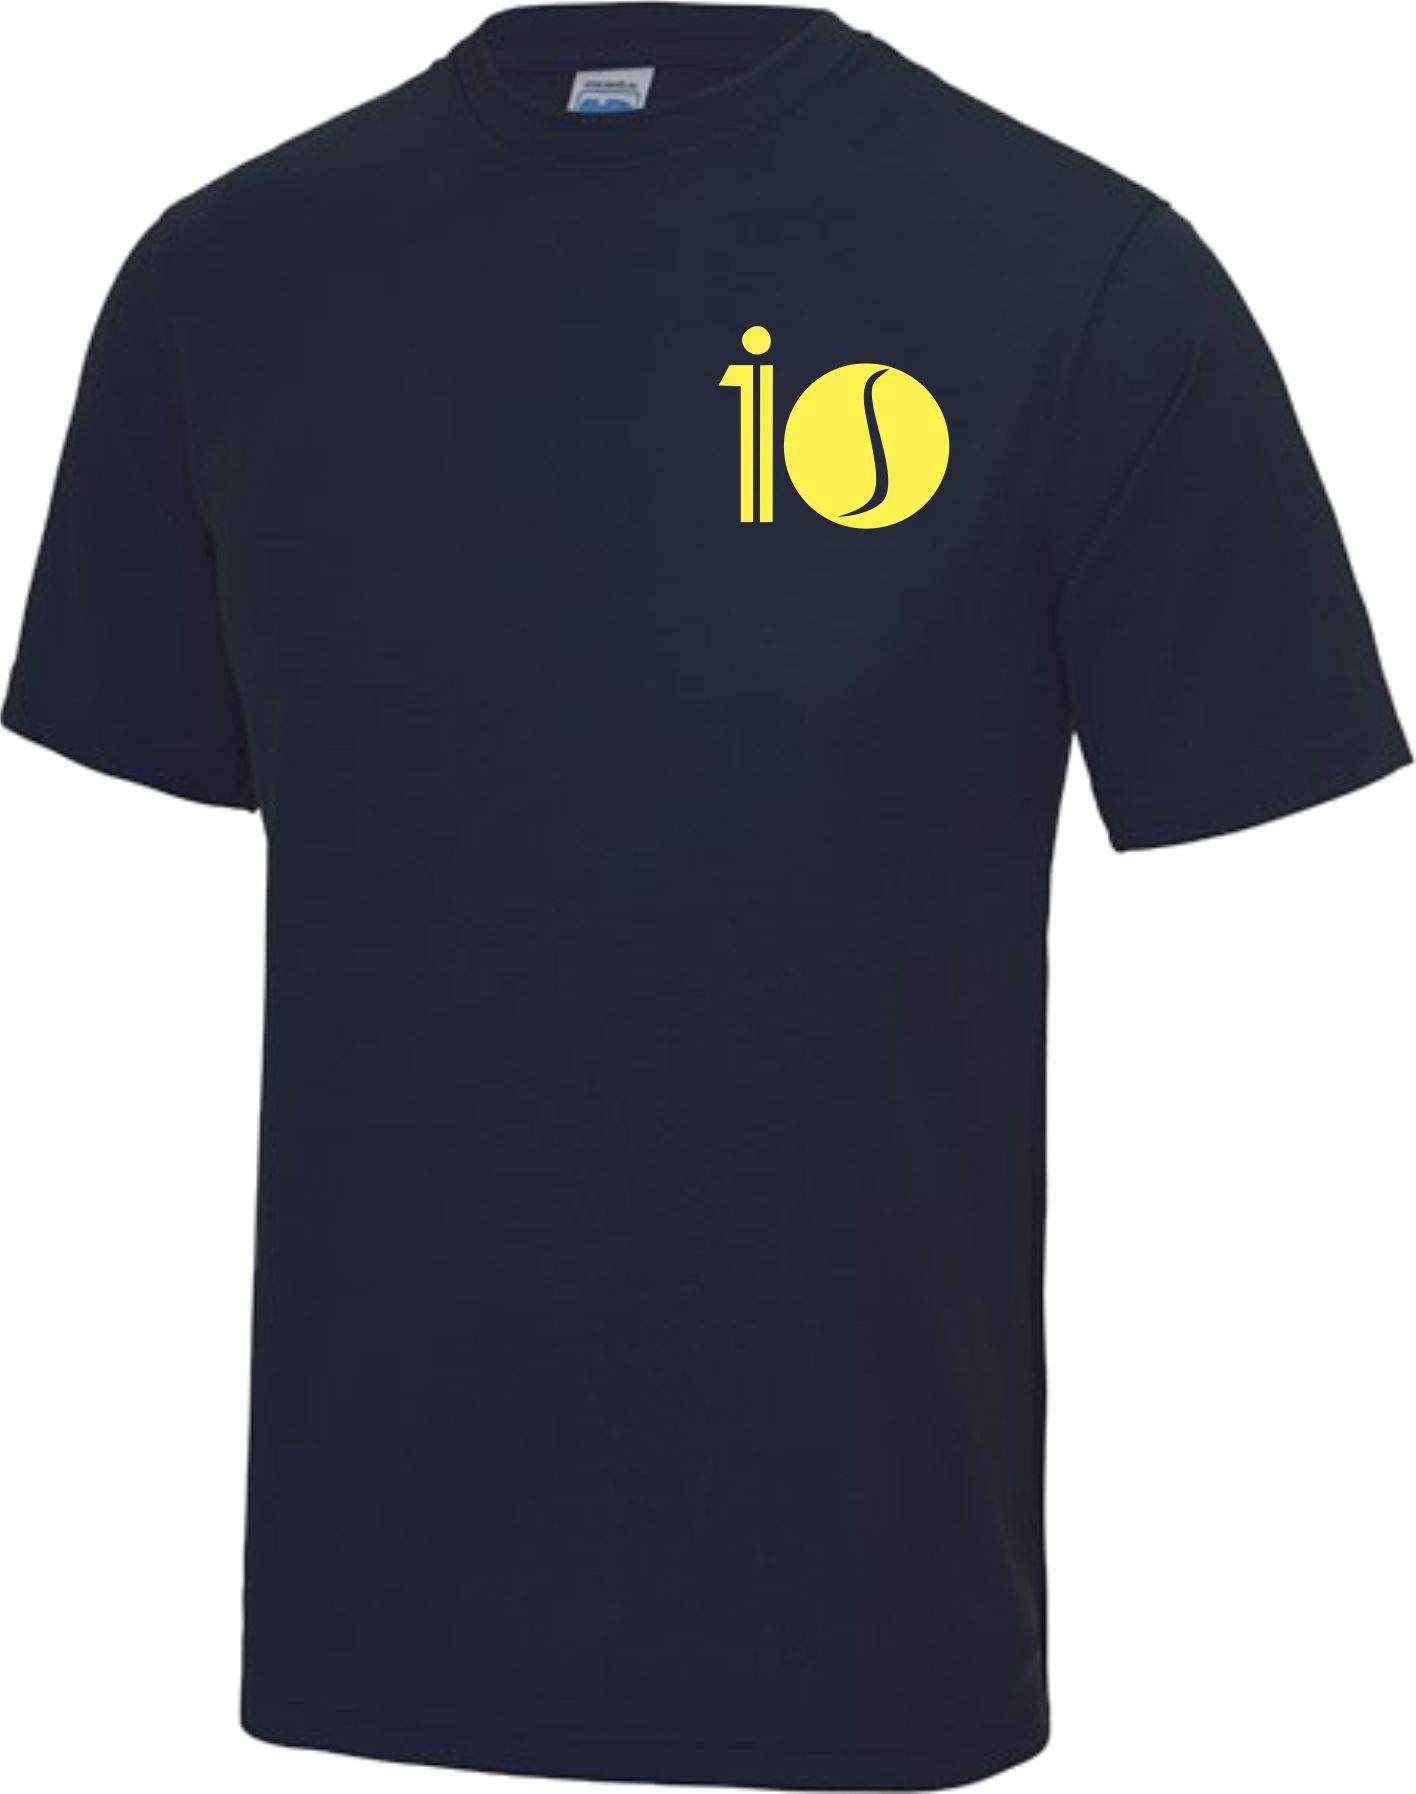 10is Academy Short Sleeve Cool T (Kids)